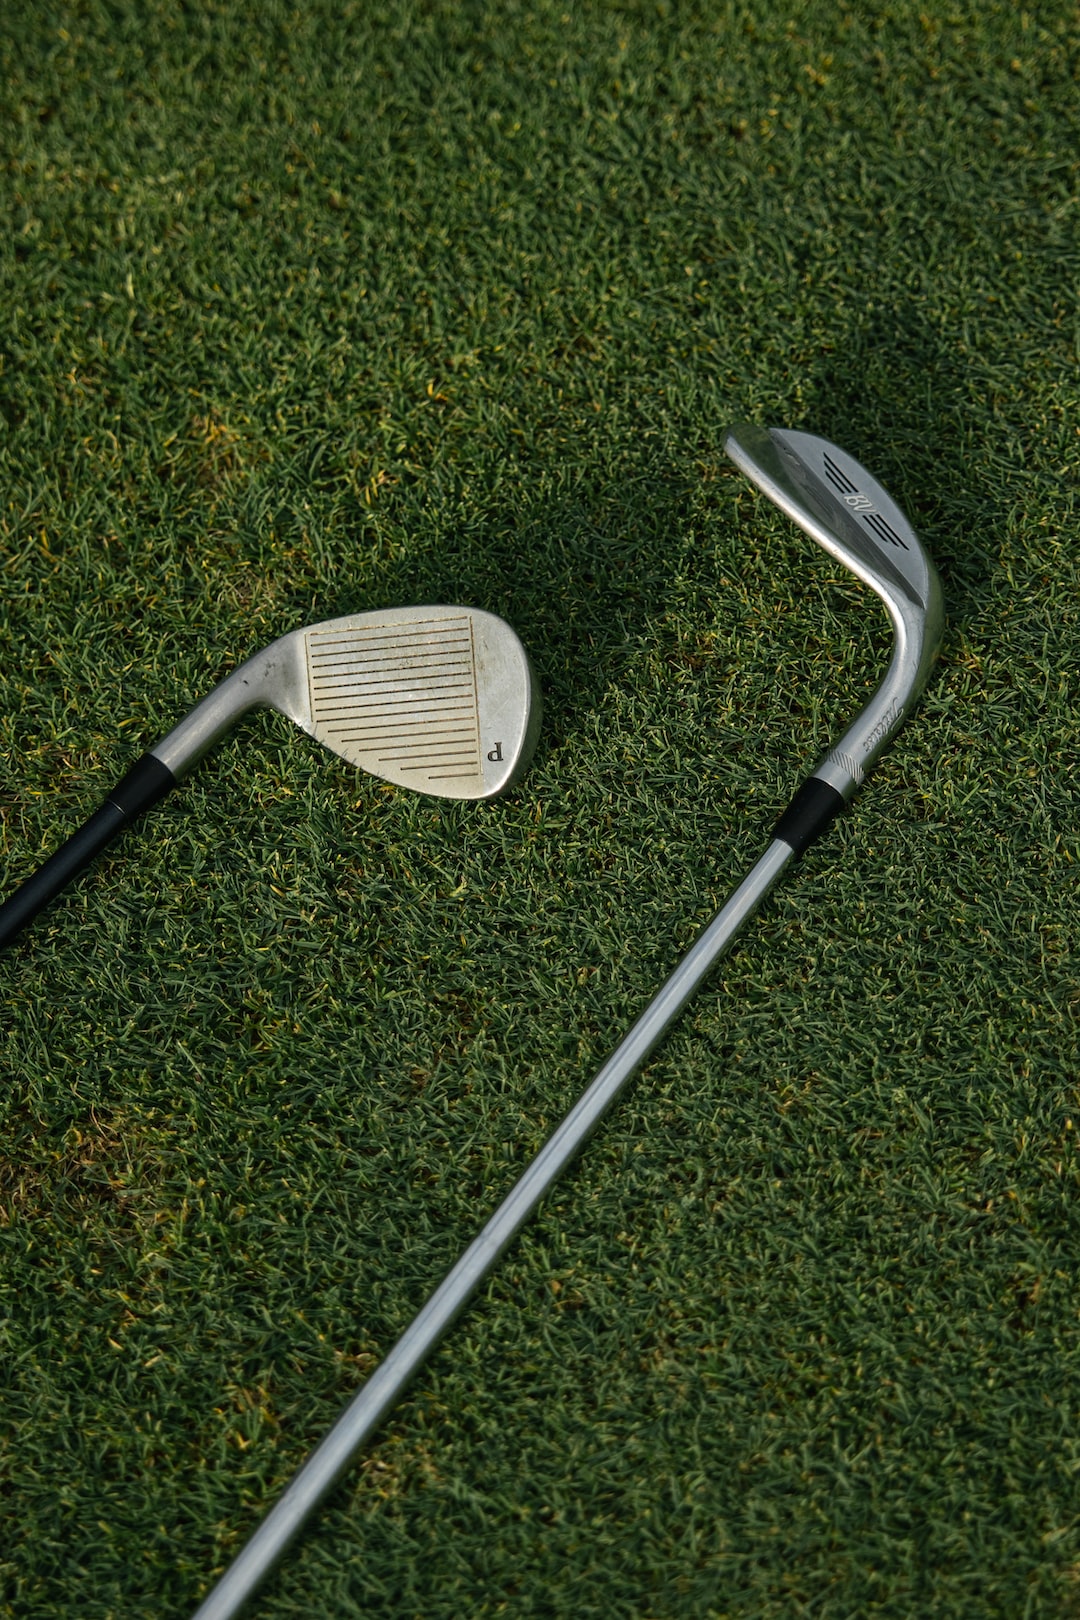 How Far Do You Need to Hit Your Wedges?